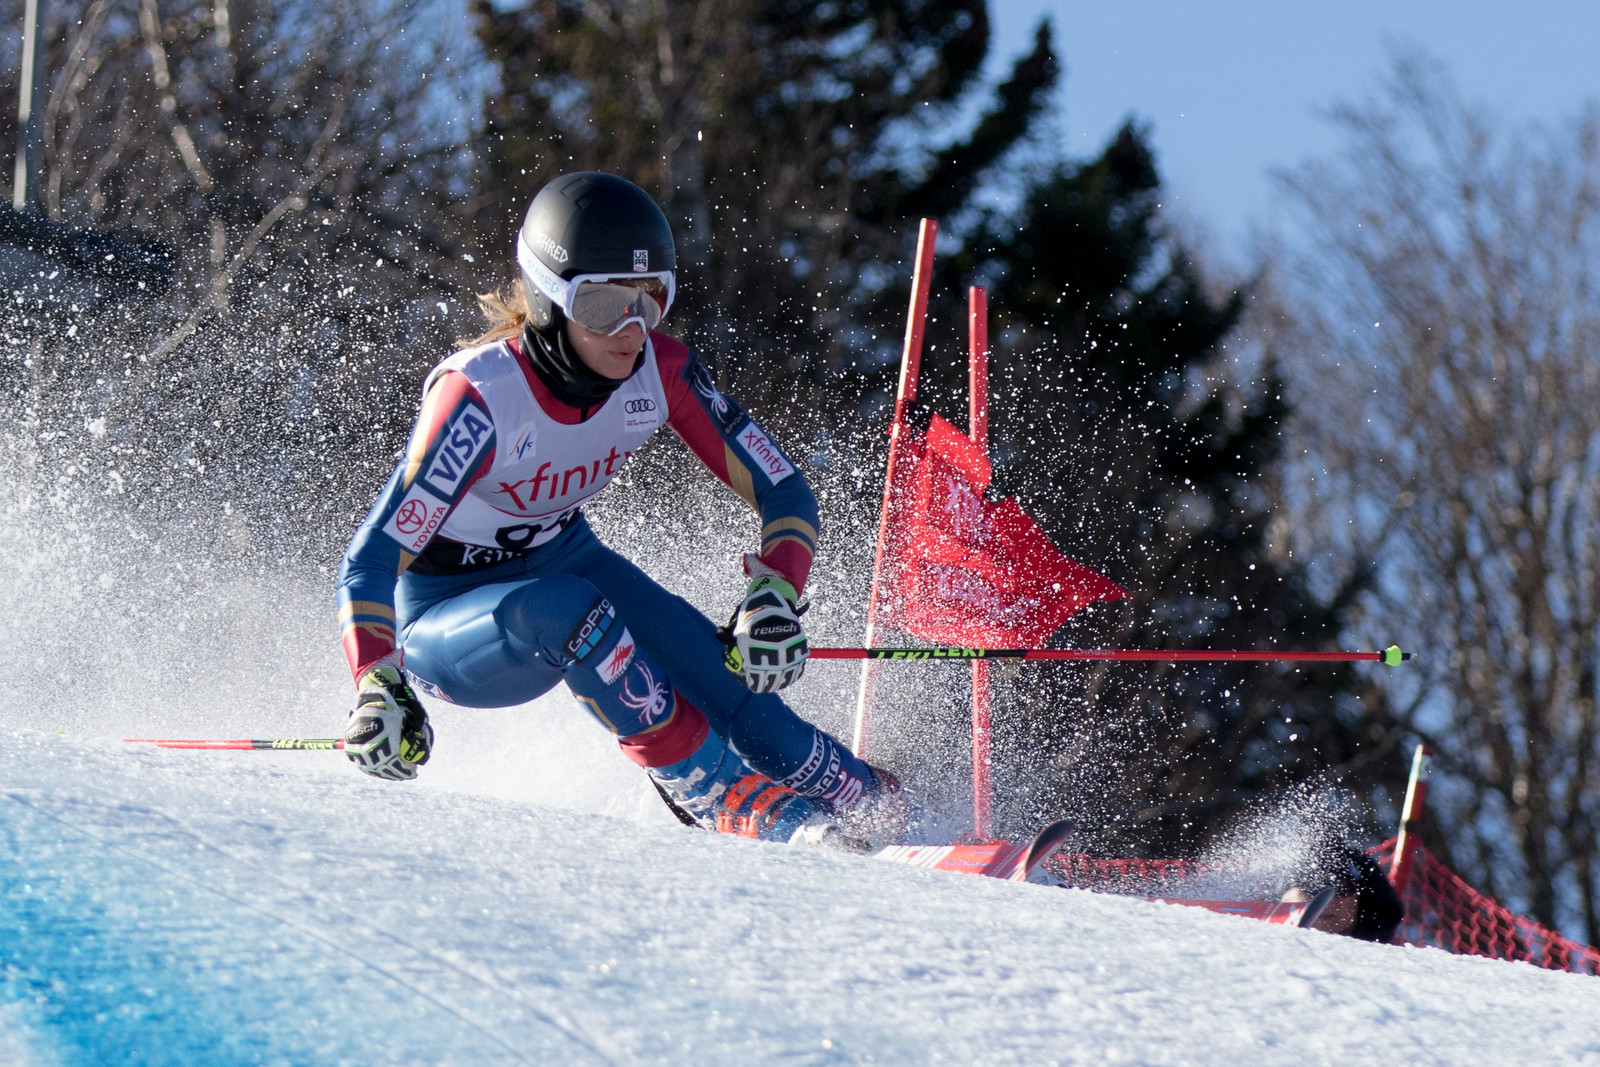 PHOTO: Resi Stiegler will compete for Team USA at the 2018 Winter Olympics in South Korea.